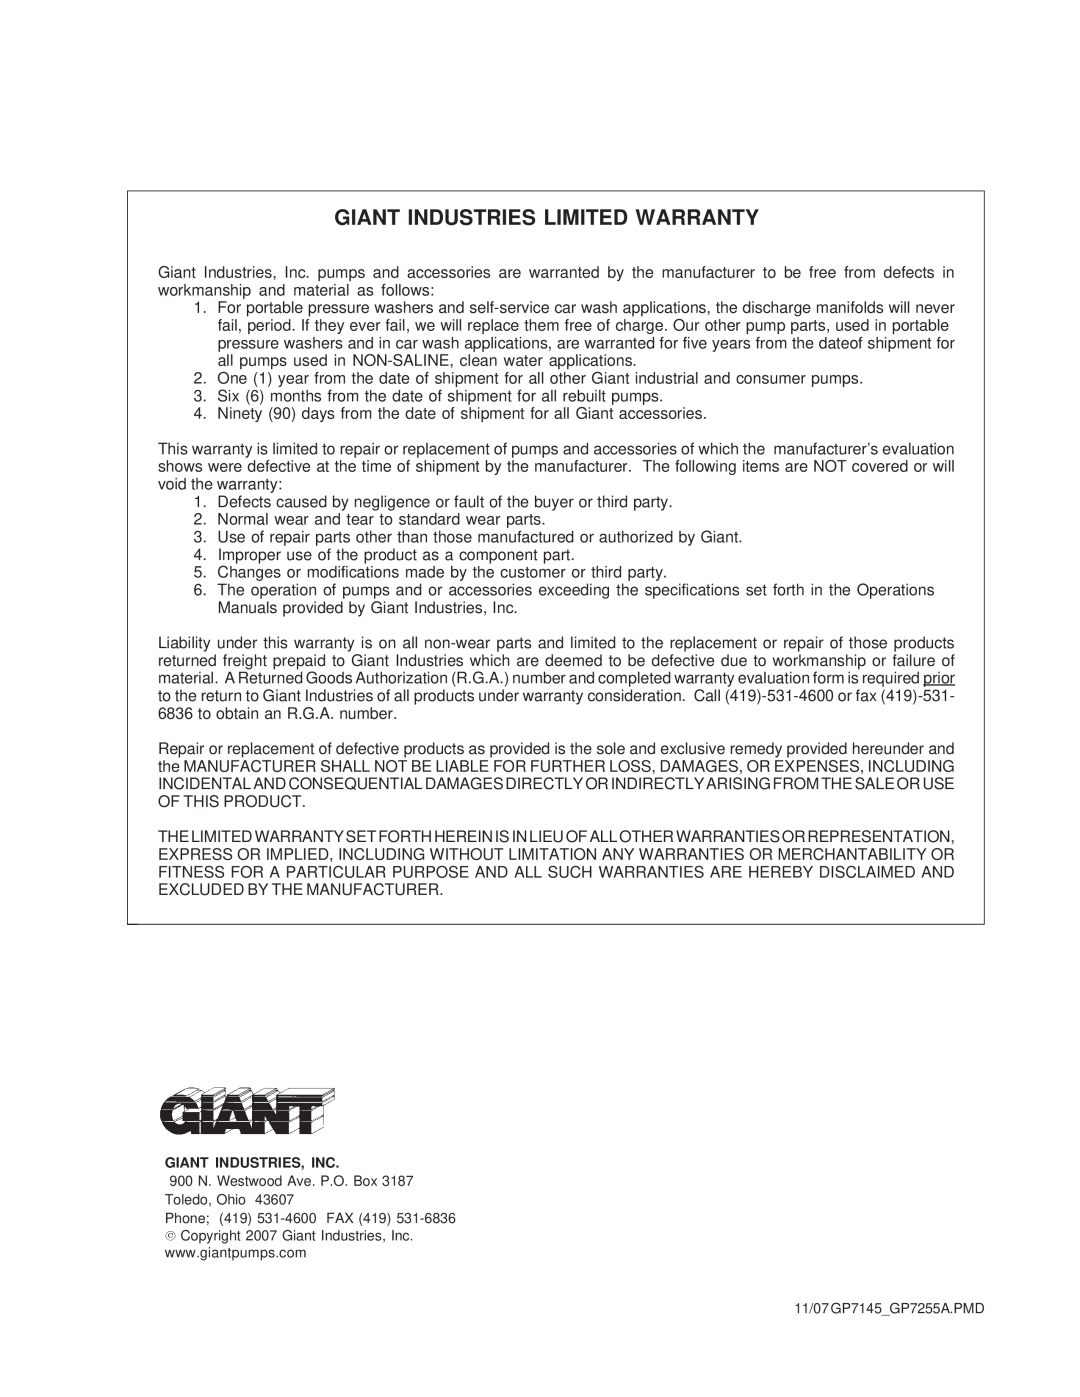 Giant GP7145 installation instructions Giant Industries Limited Warranty 